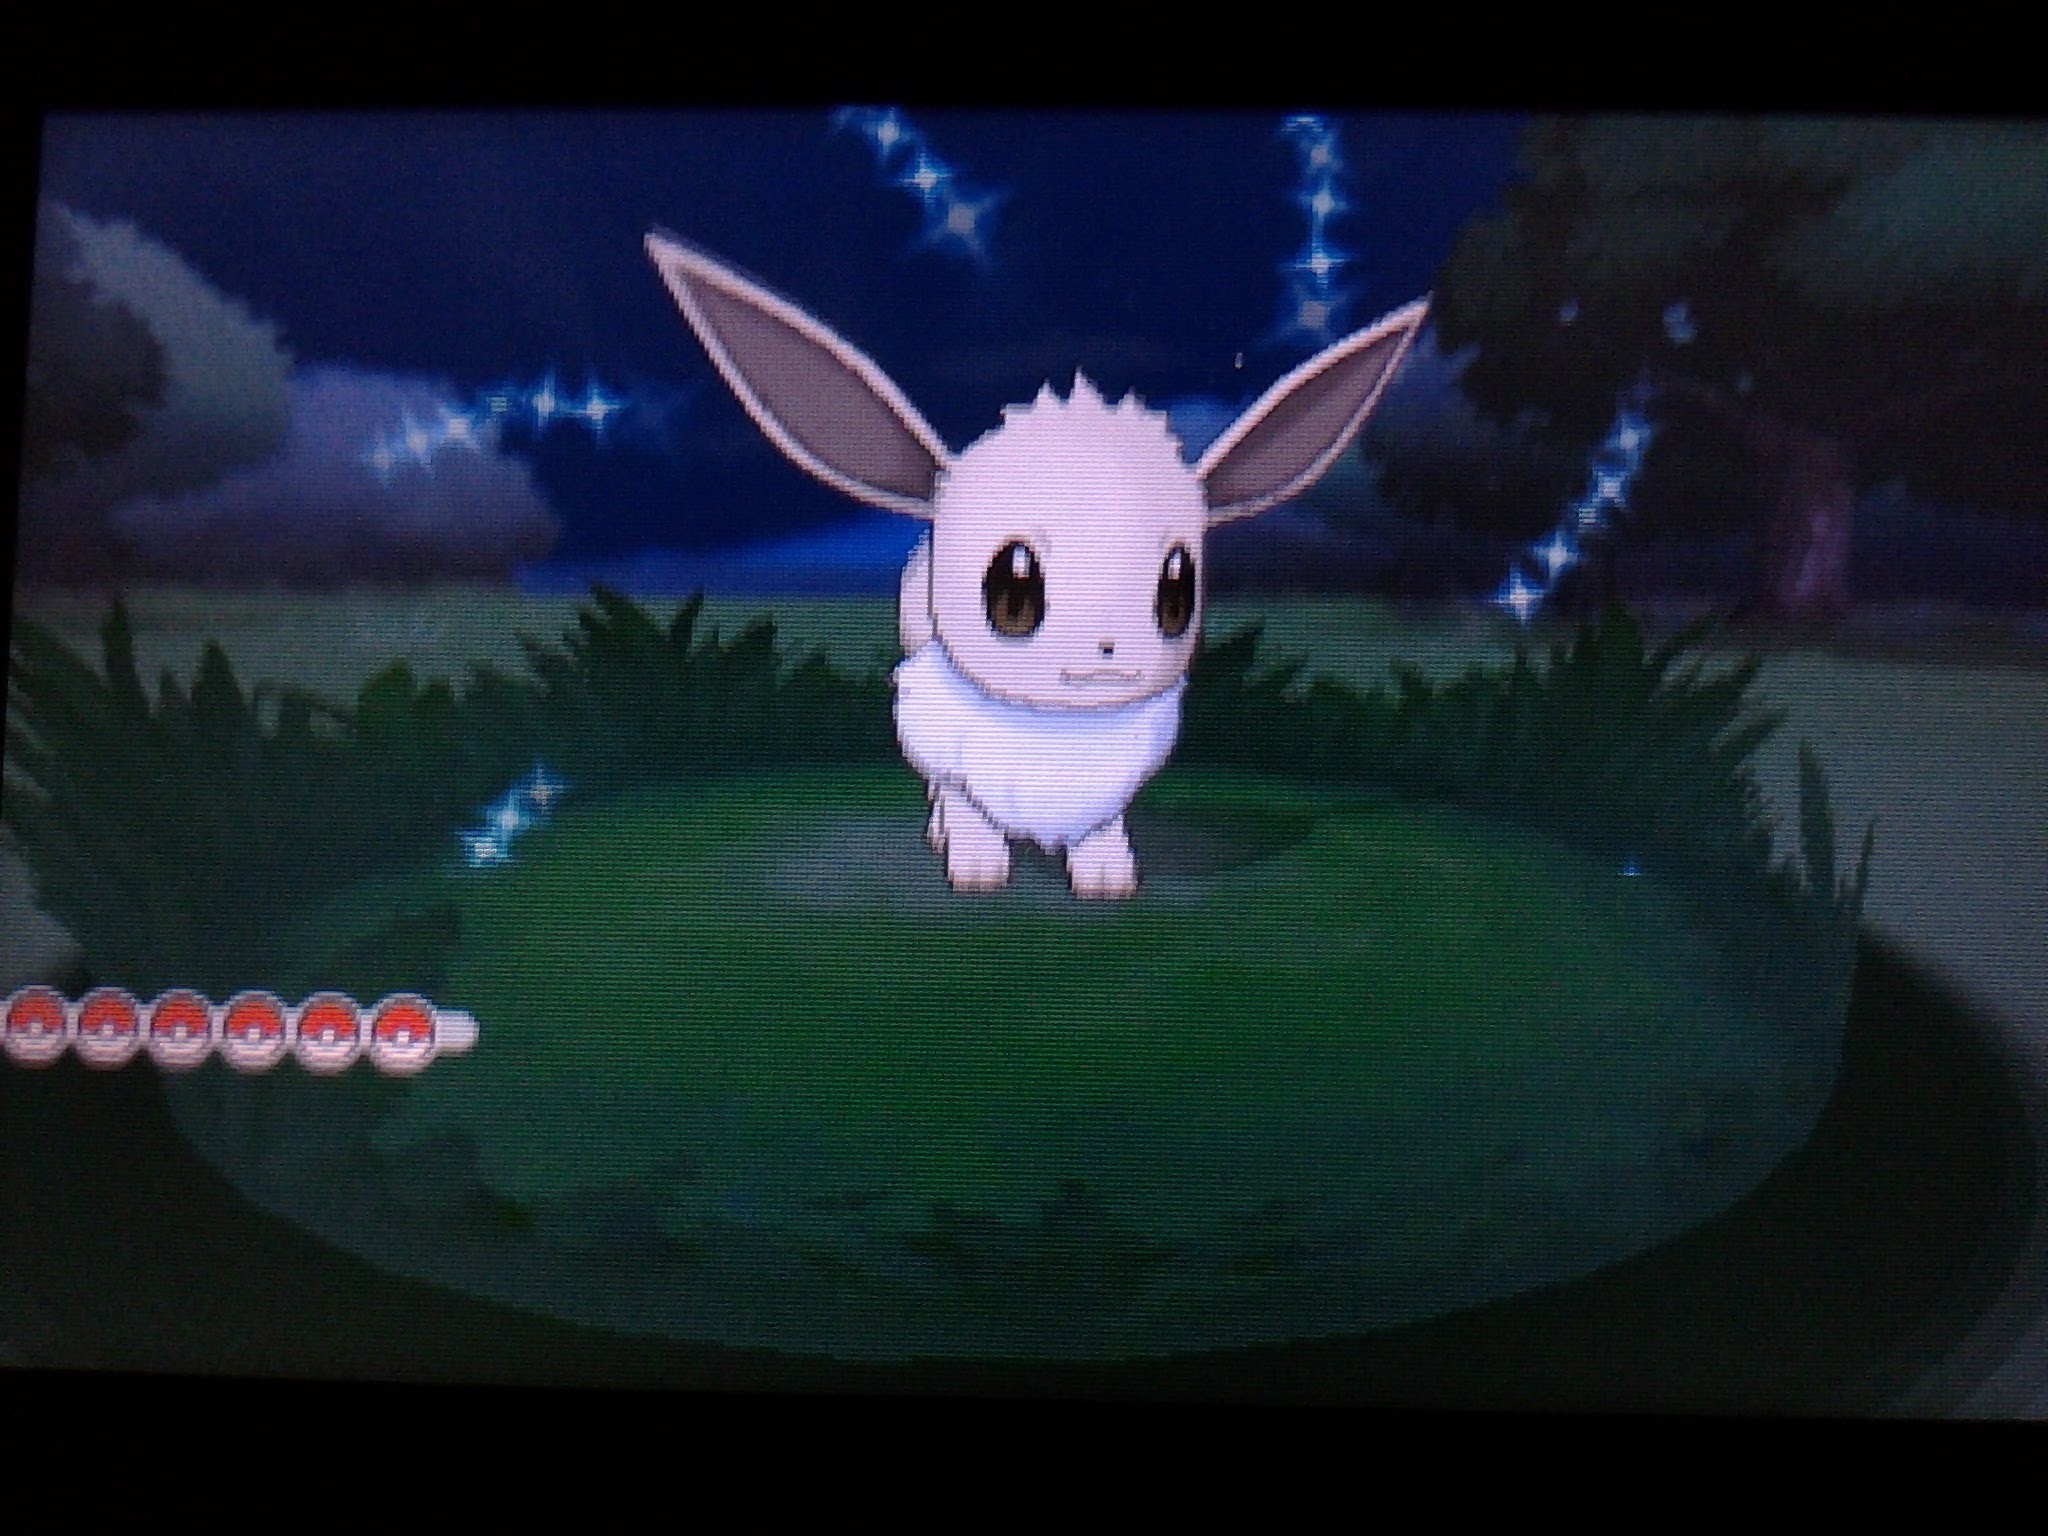 Live shiny Eevee after only 40 REs